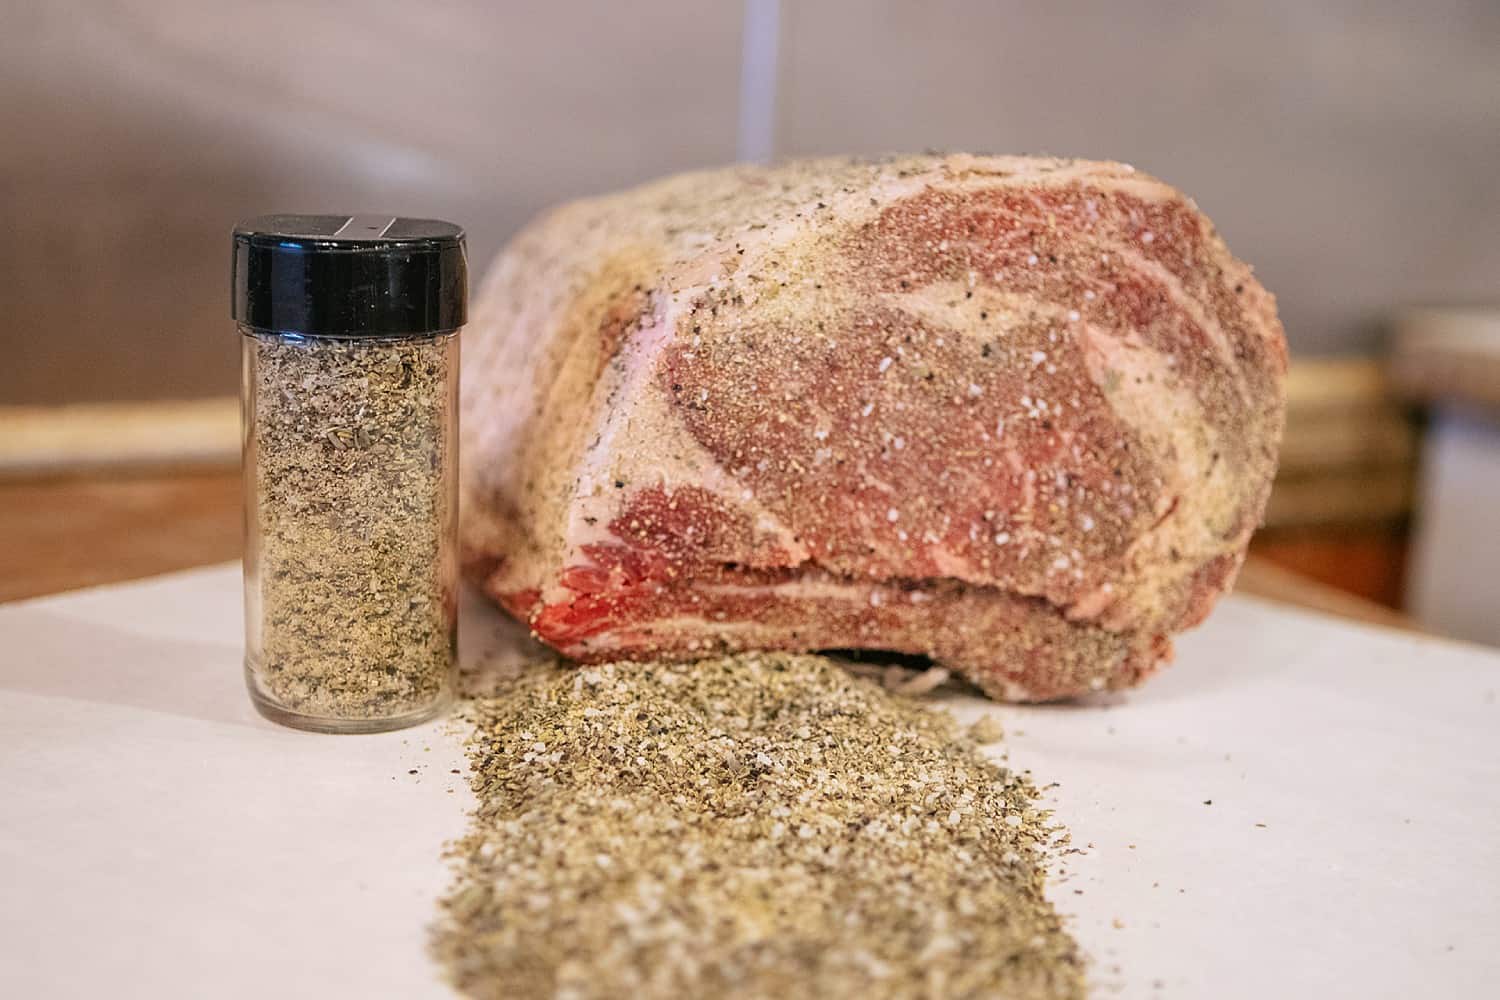 Meat covered in spice mix